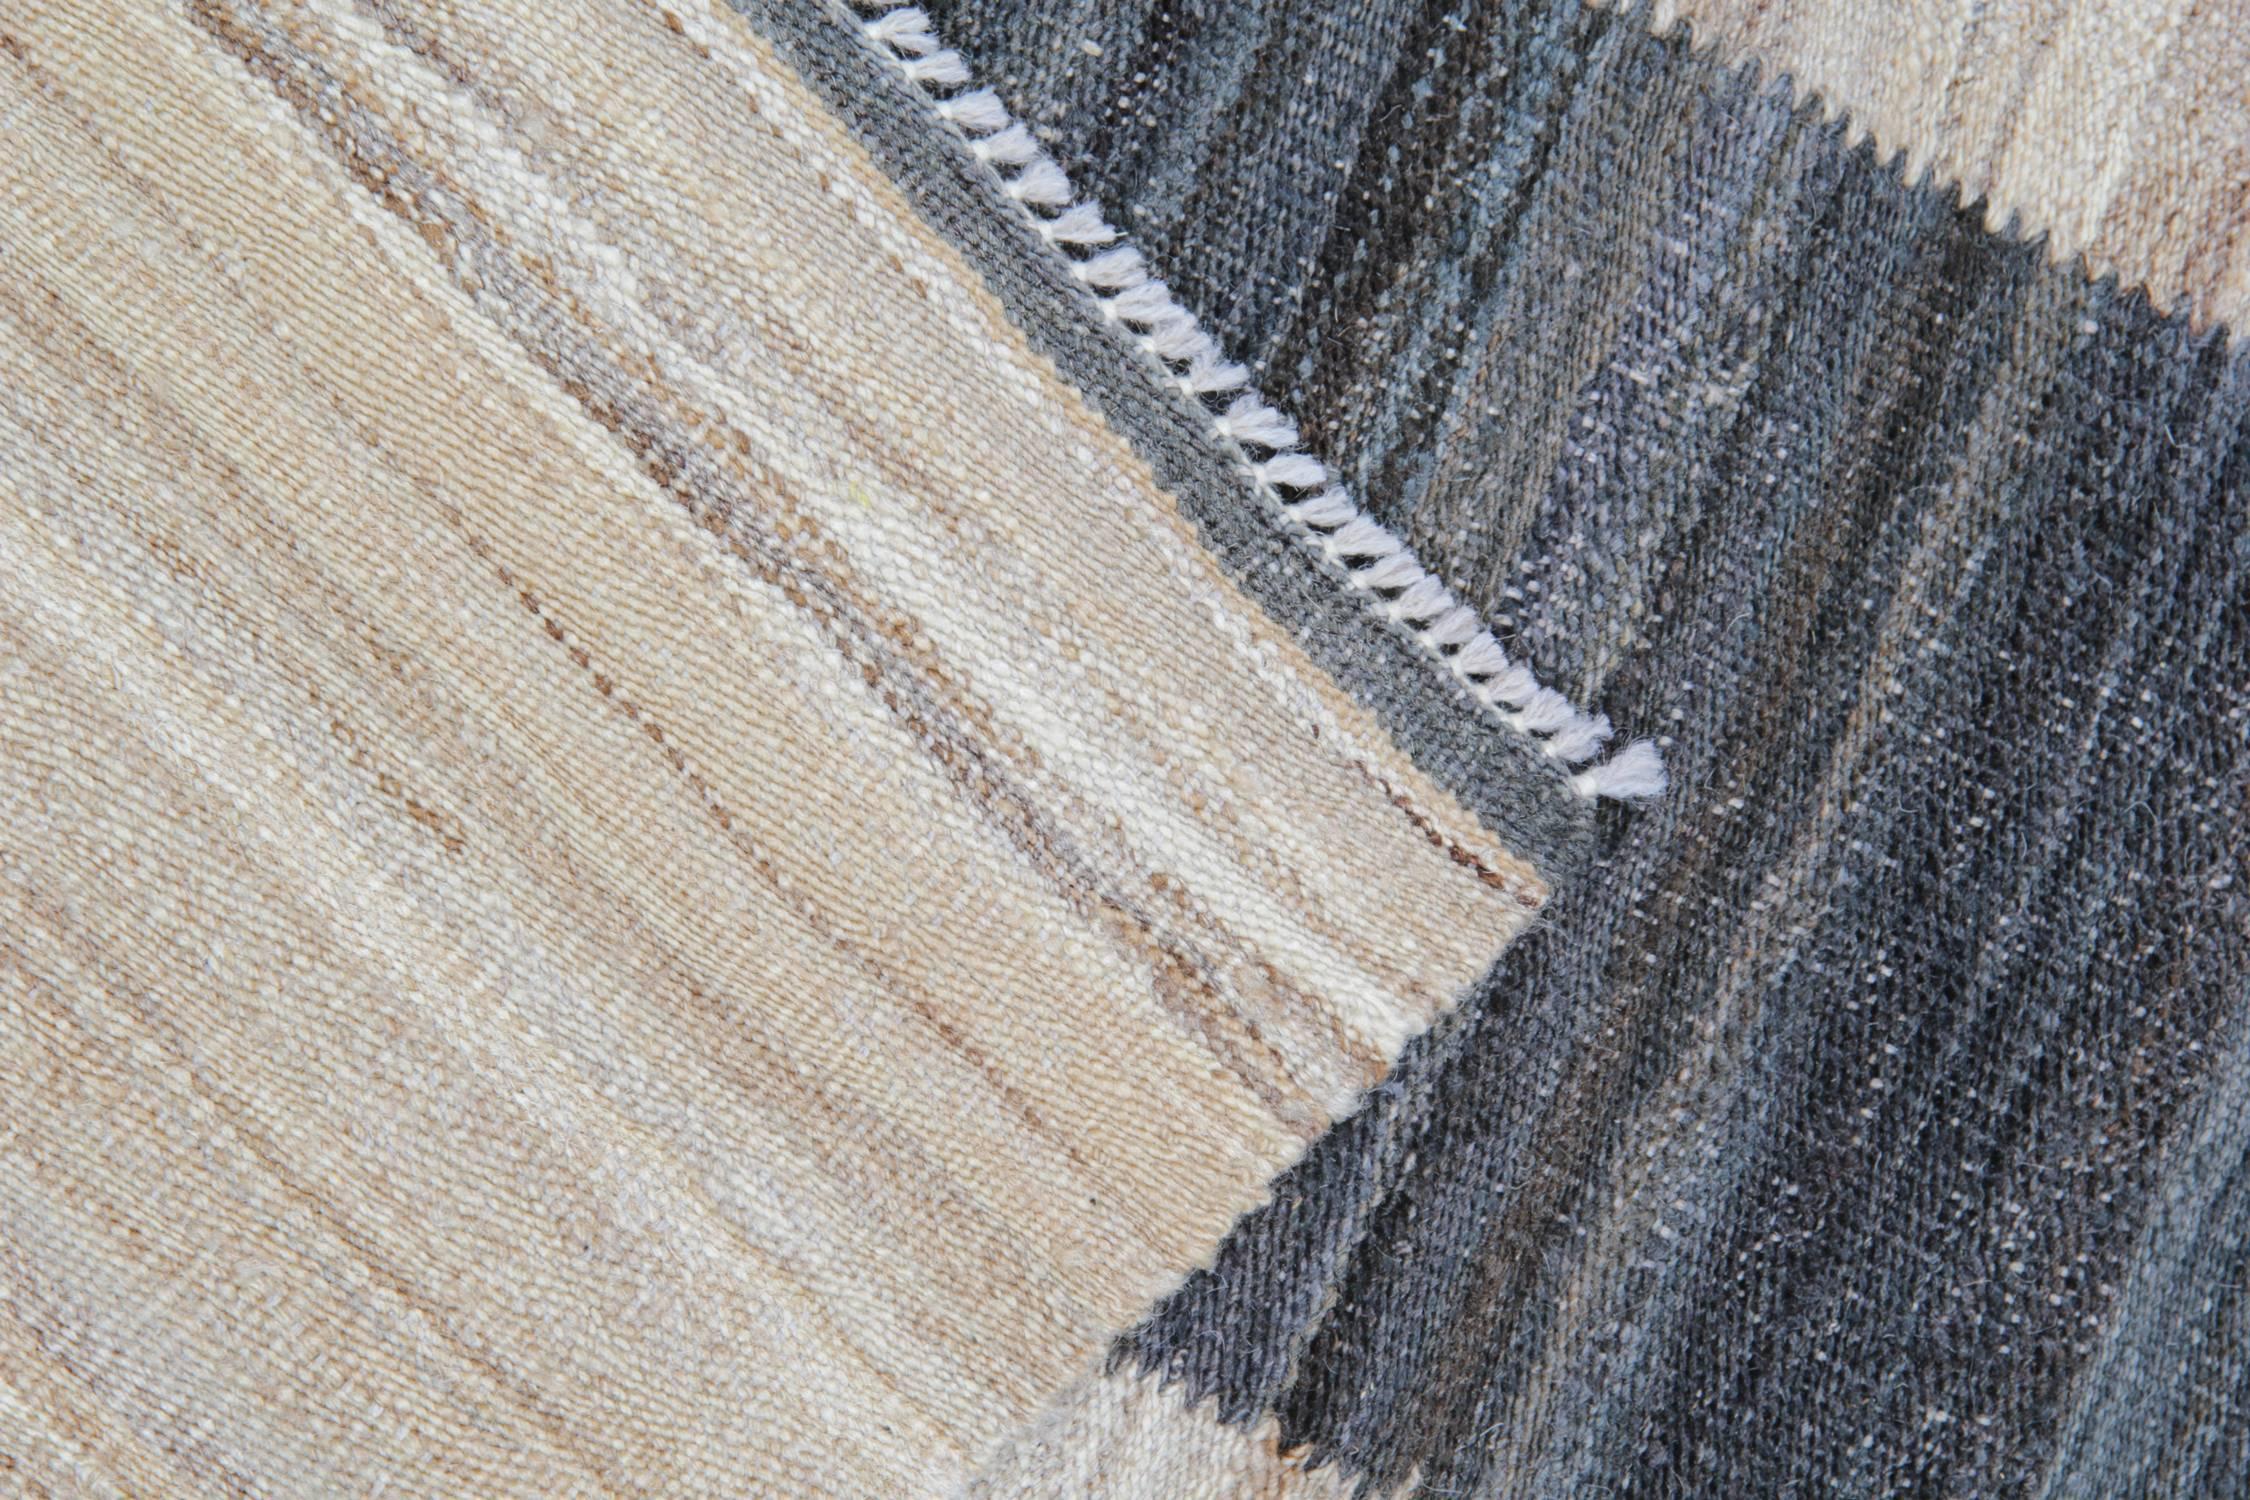 These contemporary rugs have been entirely hand woven in Afghanistan. The fibres and dyes are natural: No artificial dyes or chemicals have been used for these natural rugs. The brown rug and its earth colours of terracotta, beige and cream grab the